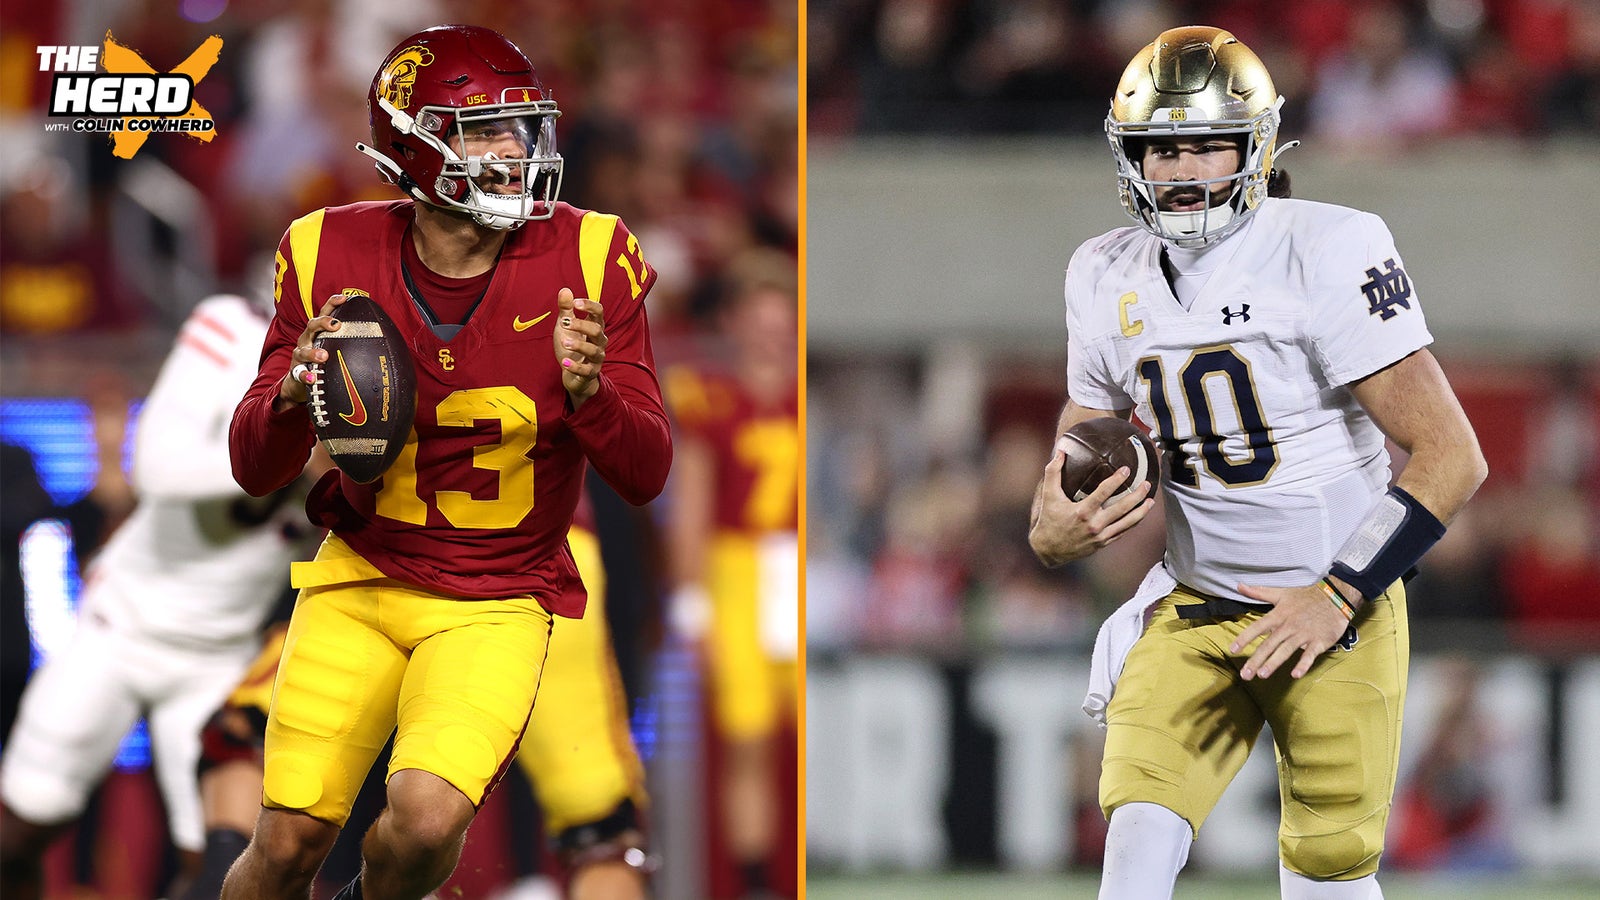 Will weather benefit Notre Dame in potential upset over USC?